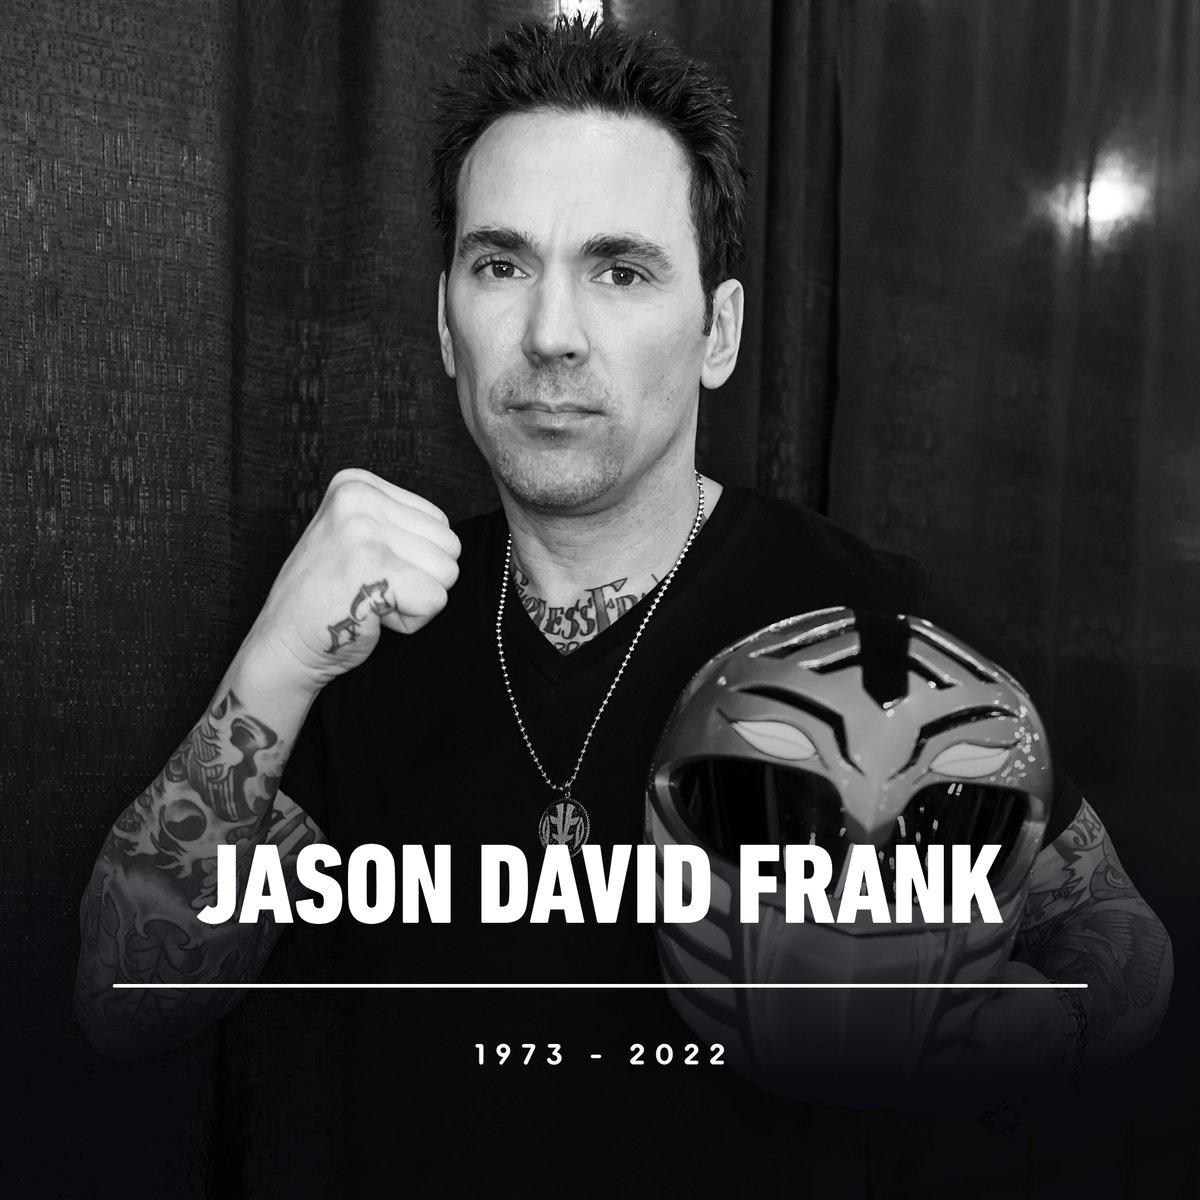 TMZ reports Jason David Frank, best known for donning the Green and White Ranger personas as Tommy Oliver on Mighty Morphin Power Rangers, has died.